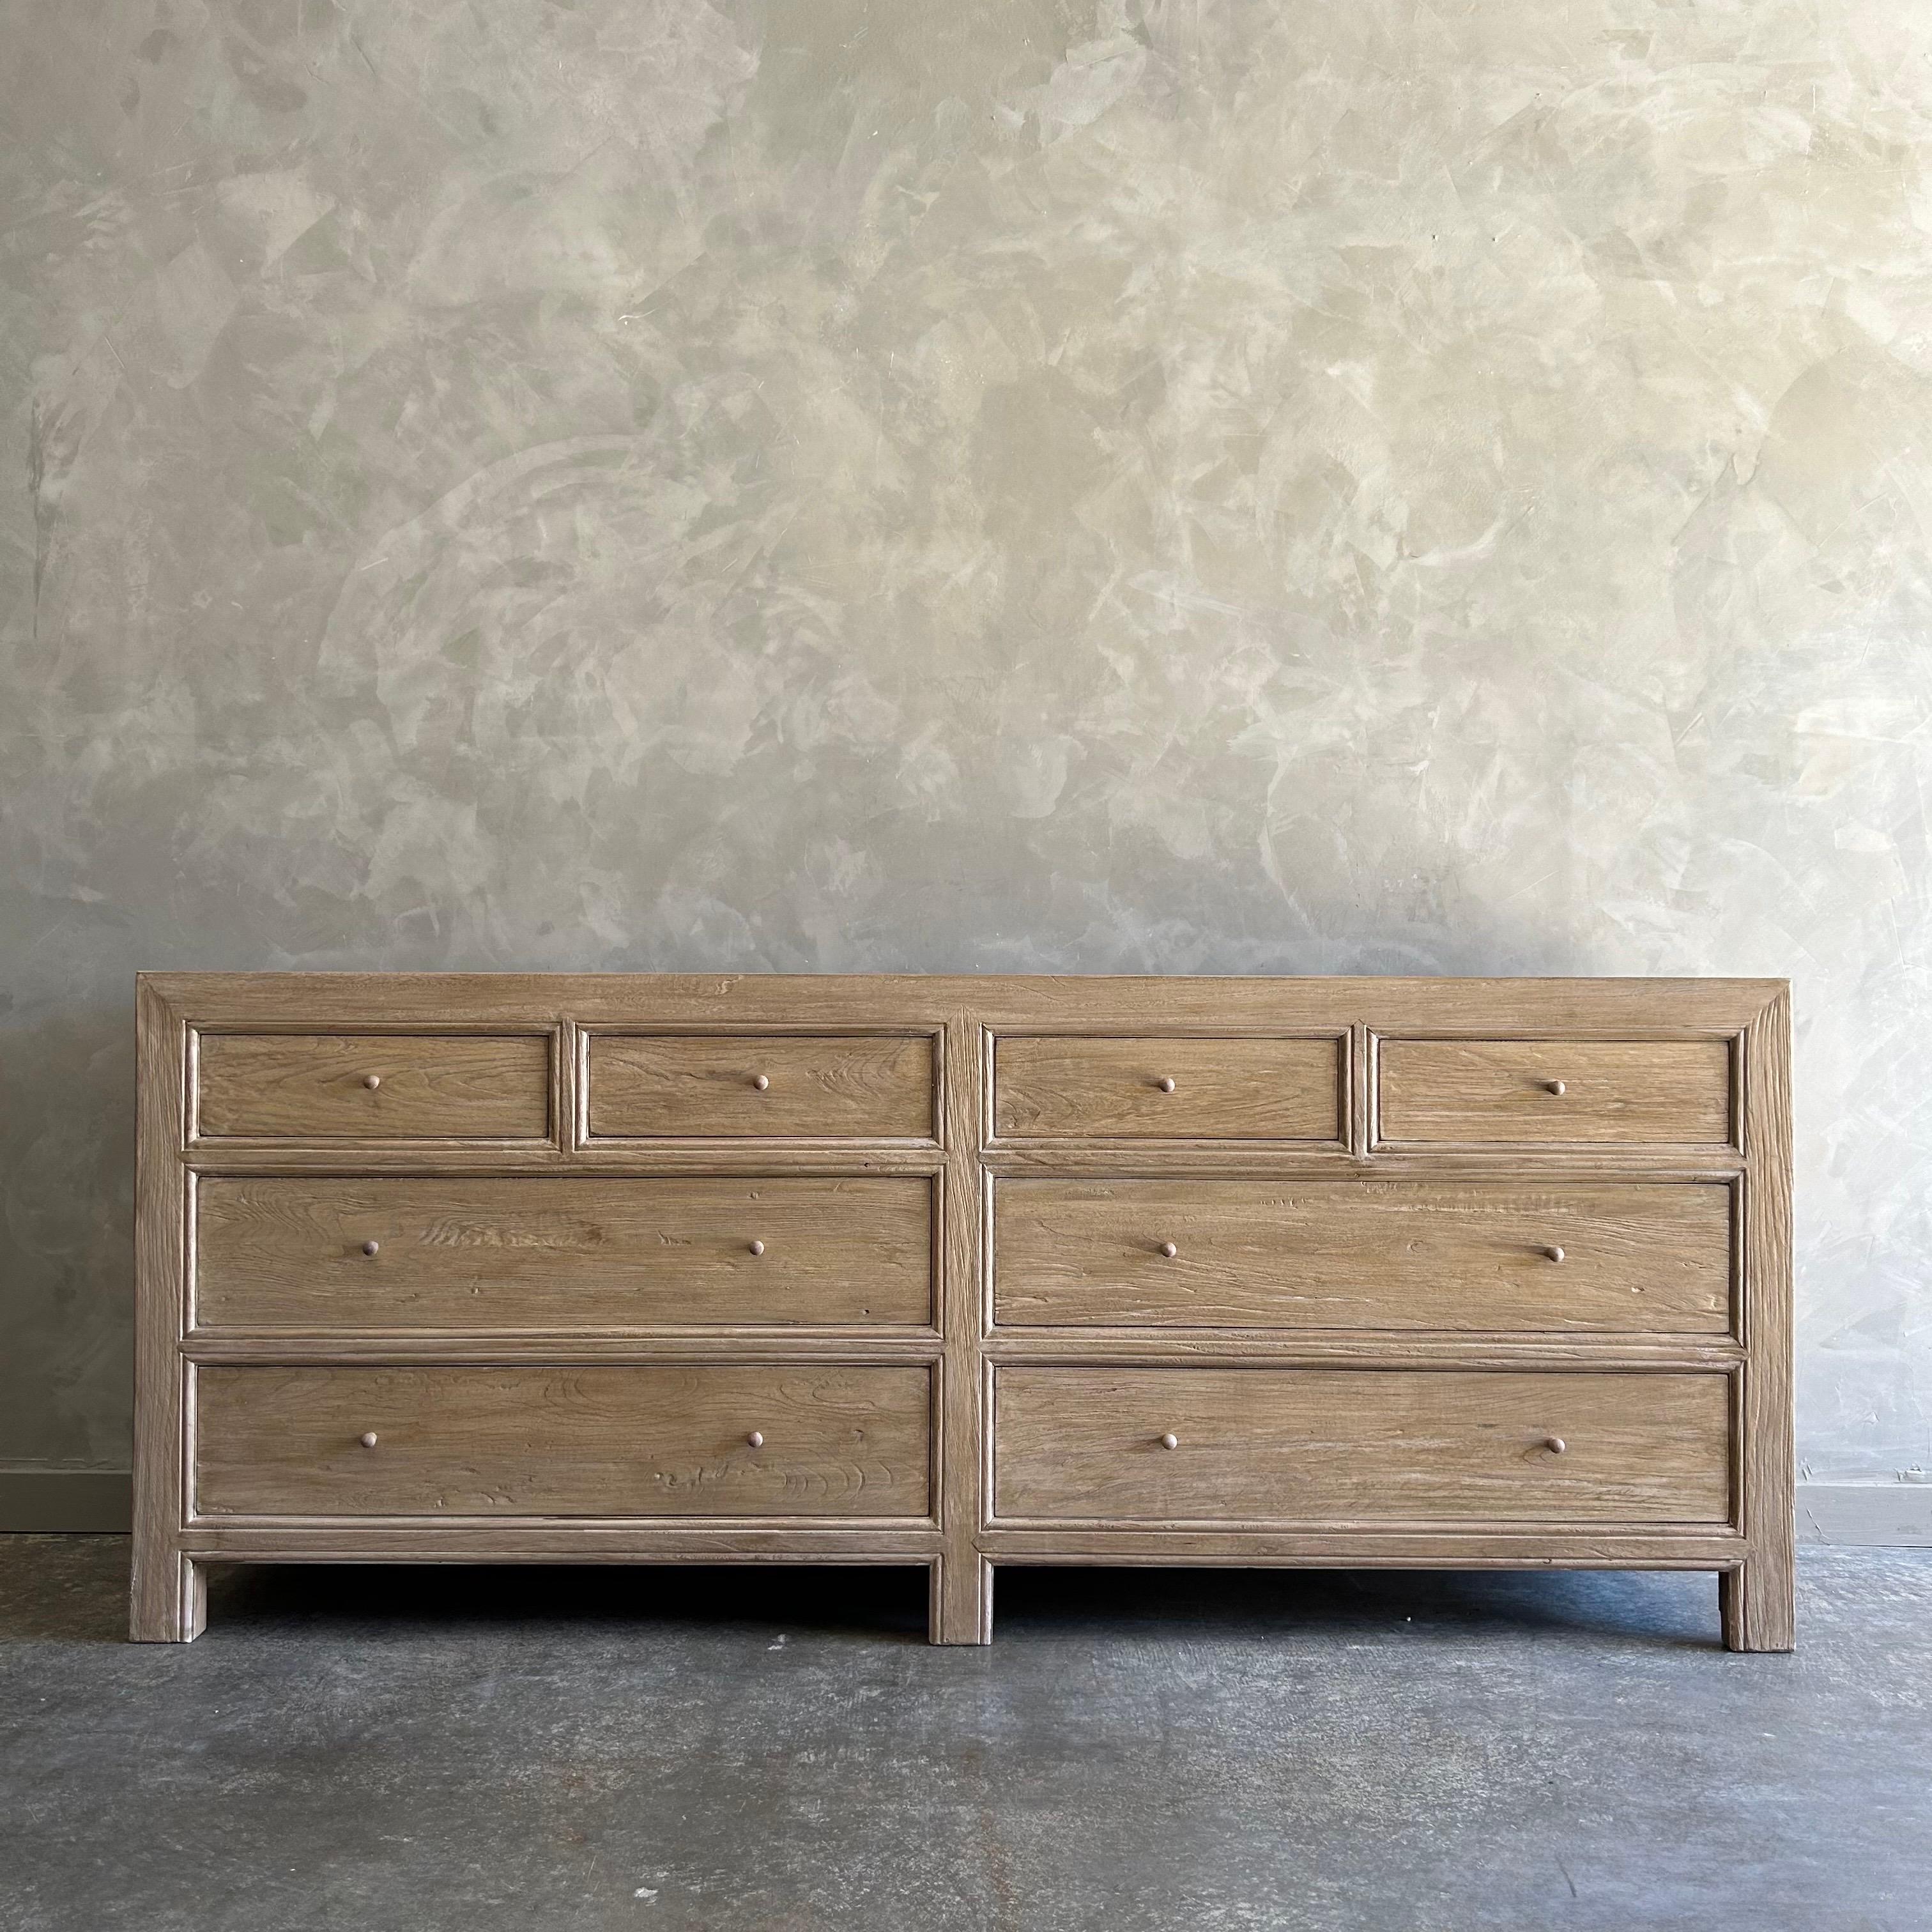 Our dresser is custom made from reclaimed elm wood in a dark walnut finish,  The eco-friendly dresser, is a great additional to any space.  Experience the beauty of reclaimed wood while enjoying the convenience of abundant storage. Dovetail